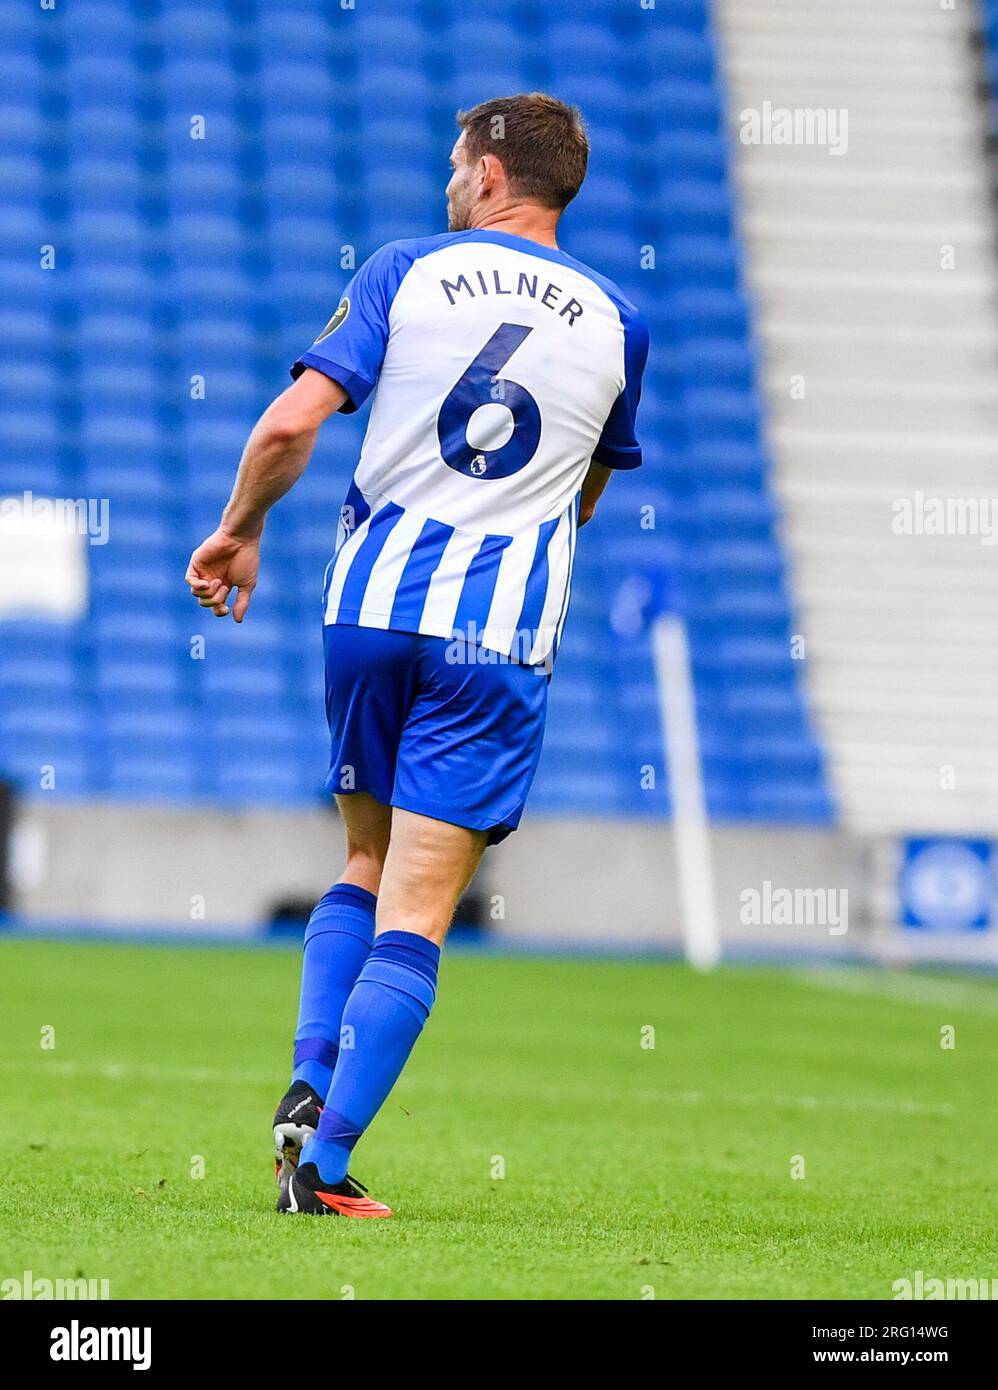 James Milner of Brighton during  the Pre Season Friendly match match between Brighton and Hove Albion and Rayo Vallecano at the Amex Stadium , Brighton , UK - 06 August 2023 -  Credit Simon Dack / Telephoto Images  Editorial use only. No merchandising. For Football images FA and Premier League restrictions apply inc. no internet/mobile usage without FAPL license - for details contact Football Dataco Stock Photo